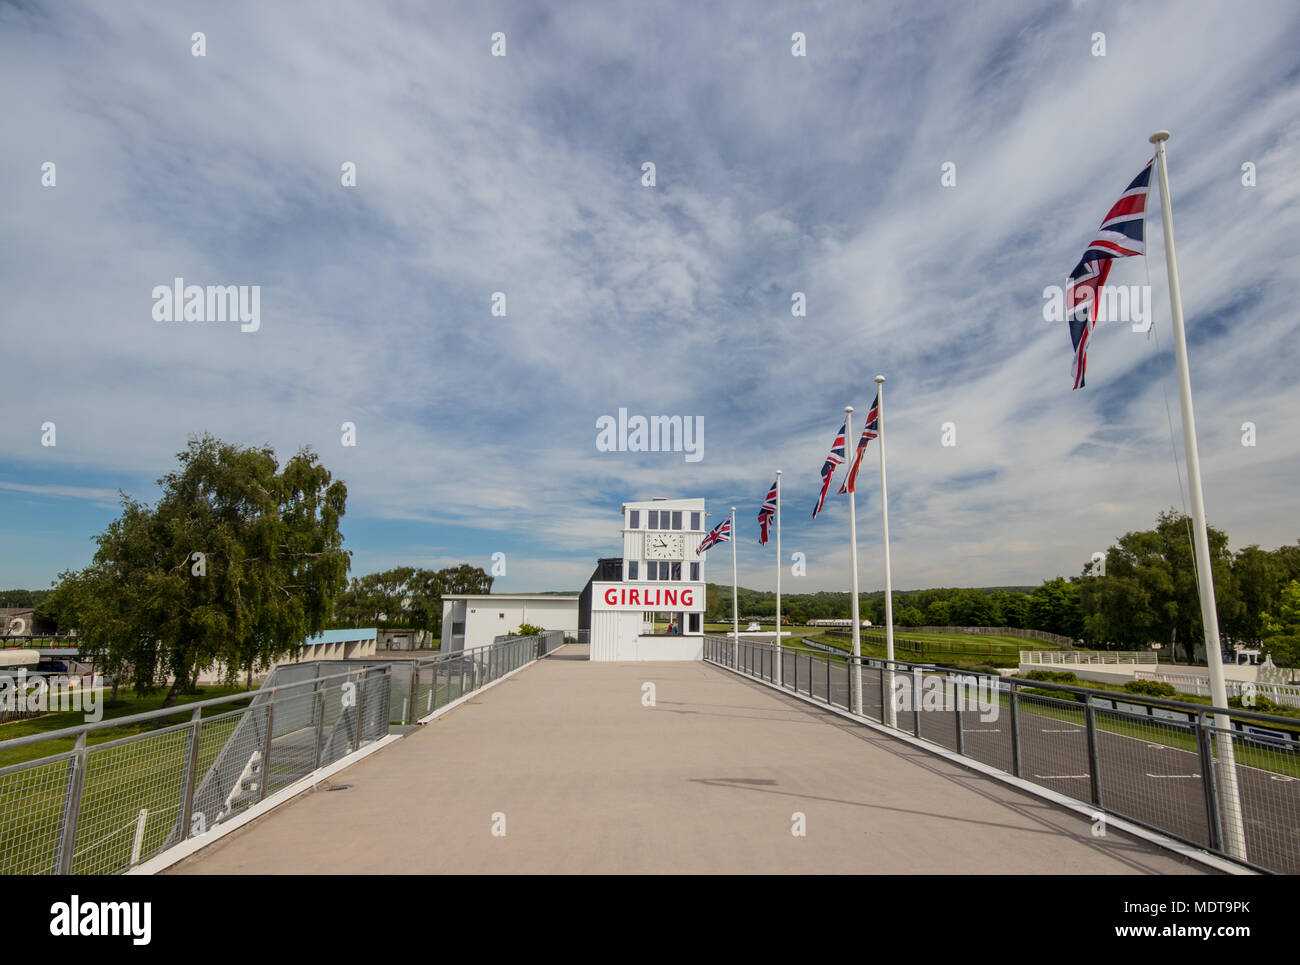 Goodwood Motor Circuit on the Goodwood Estate, near Chichester, West Sussex, UK Stock Photo